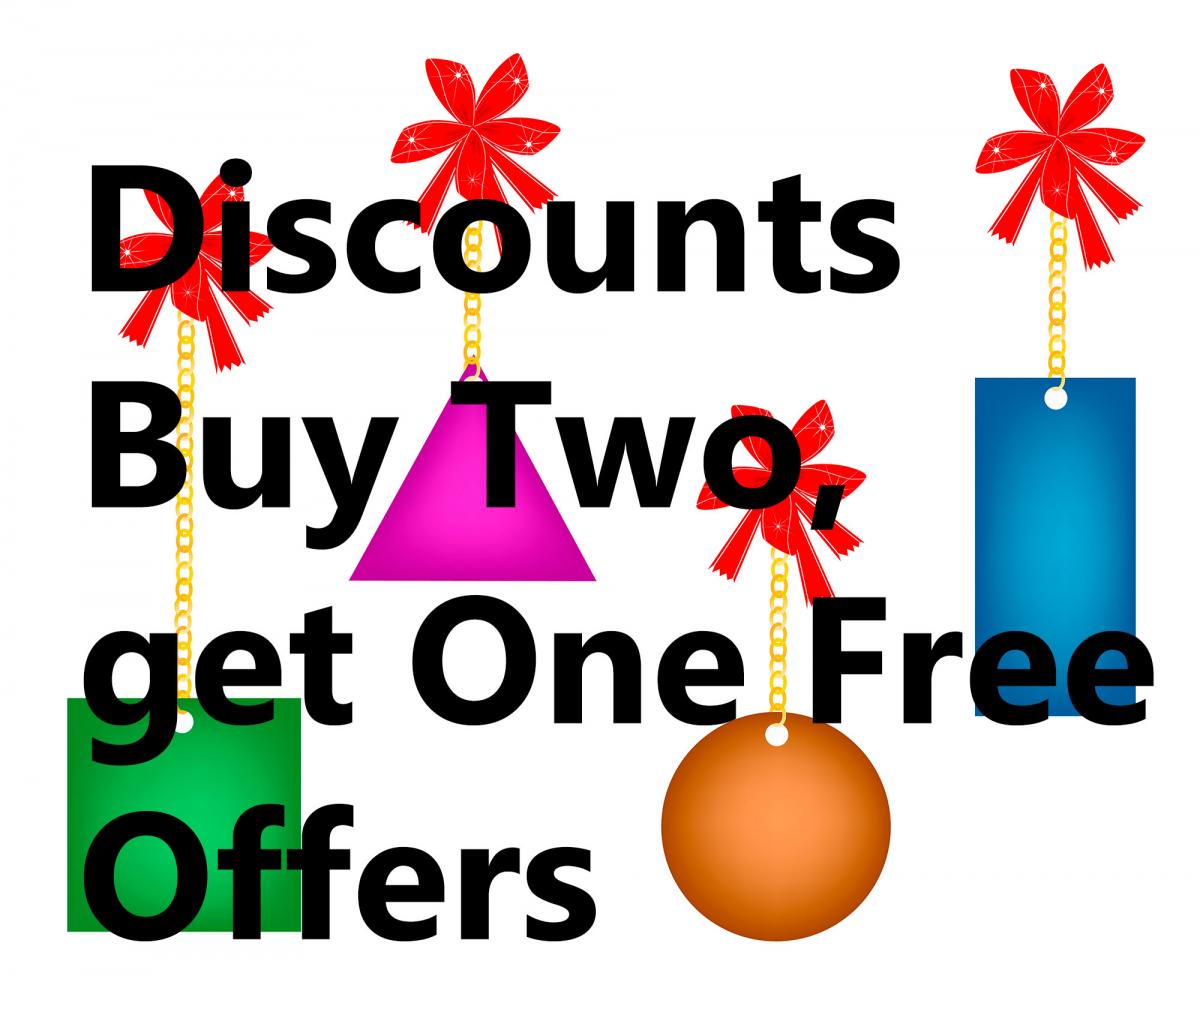 Discounts, Offers, Buy two get one free